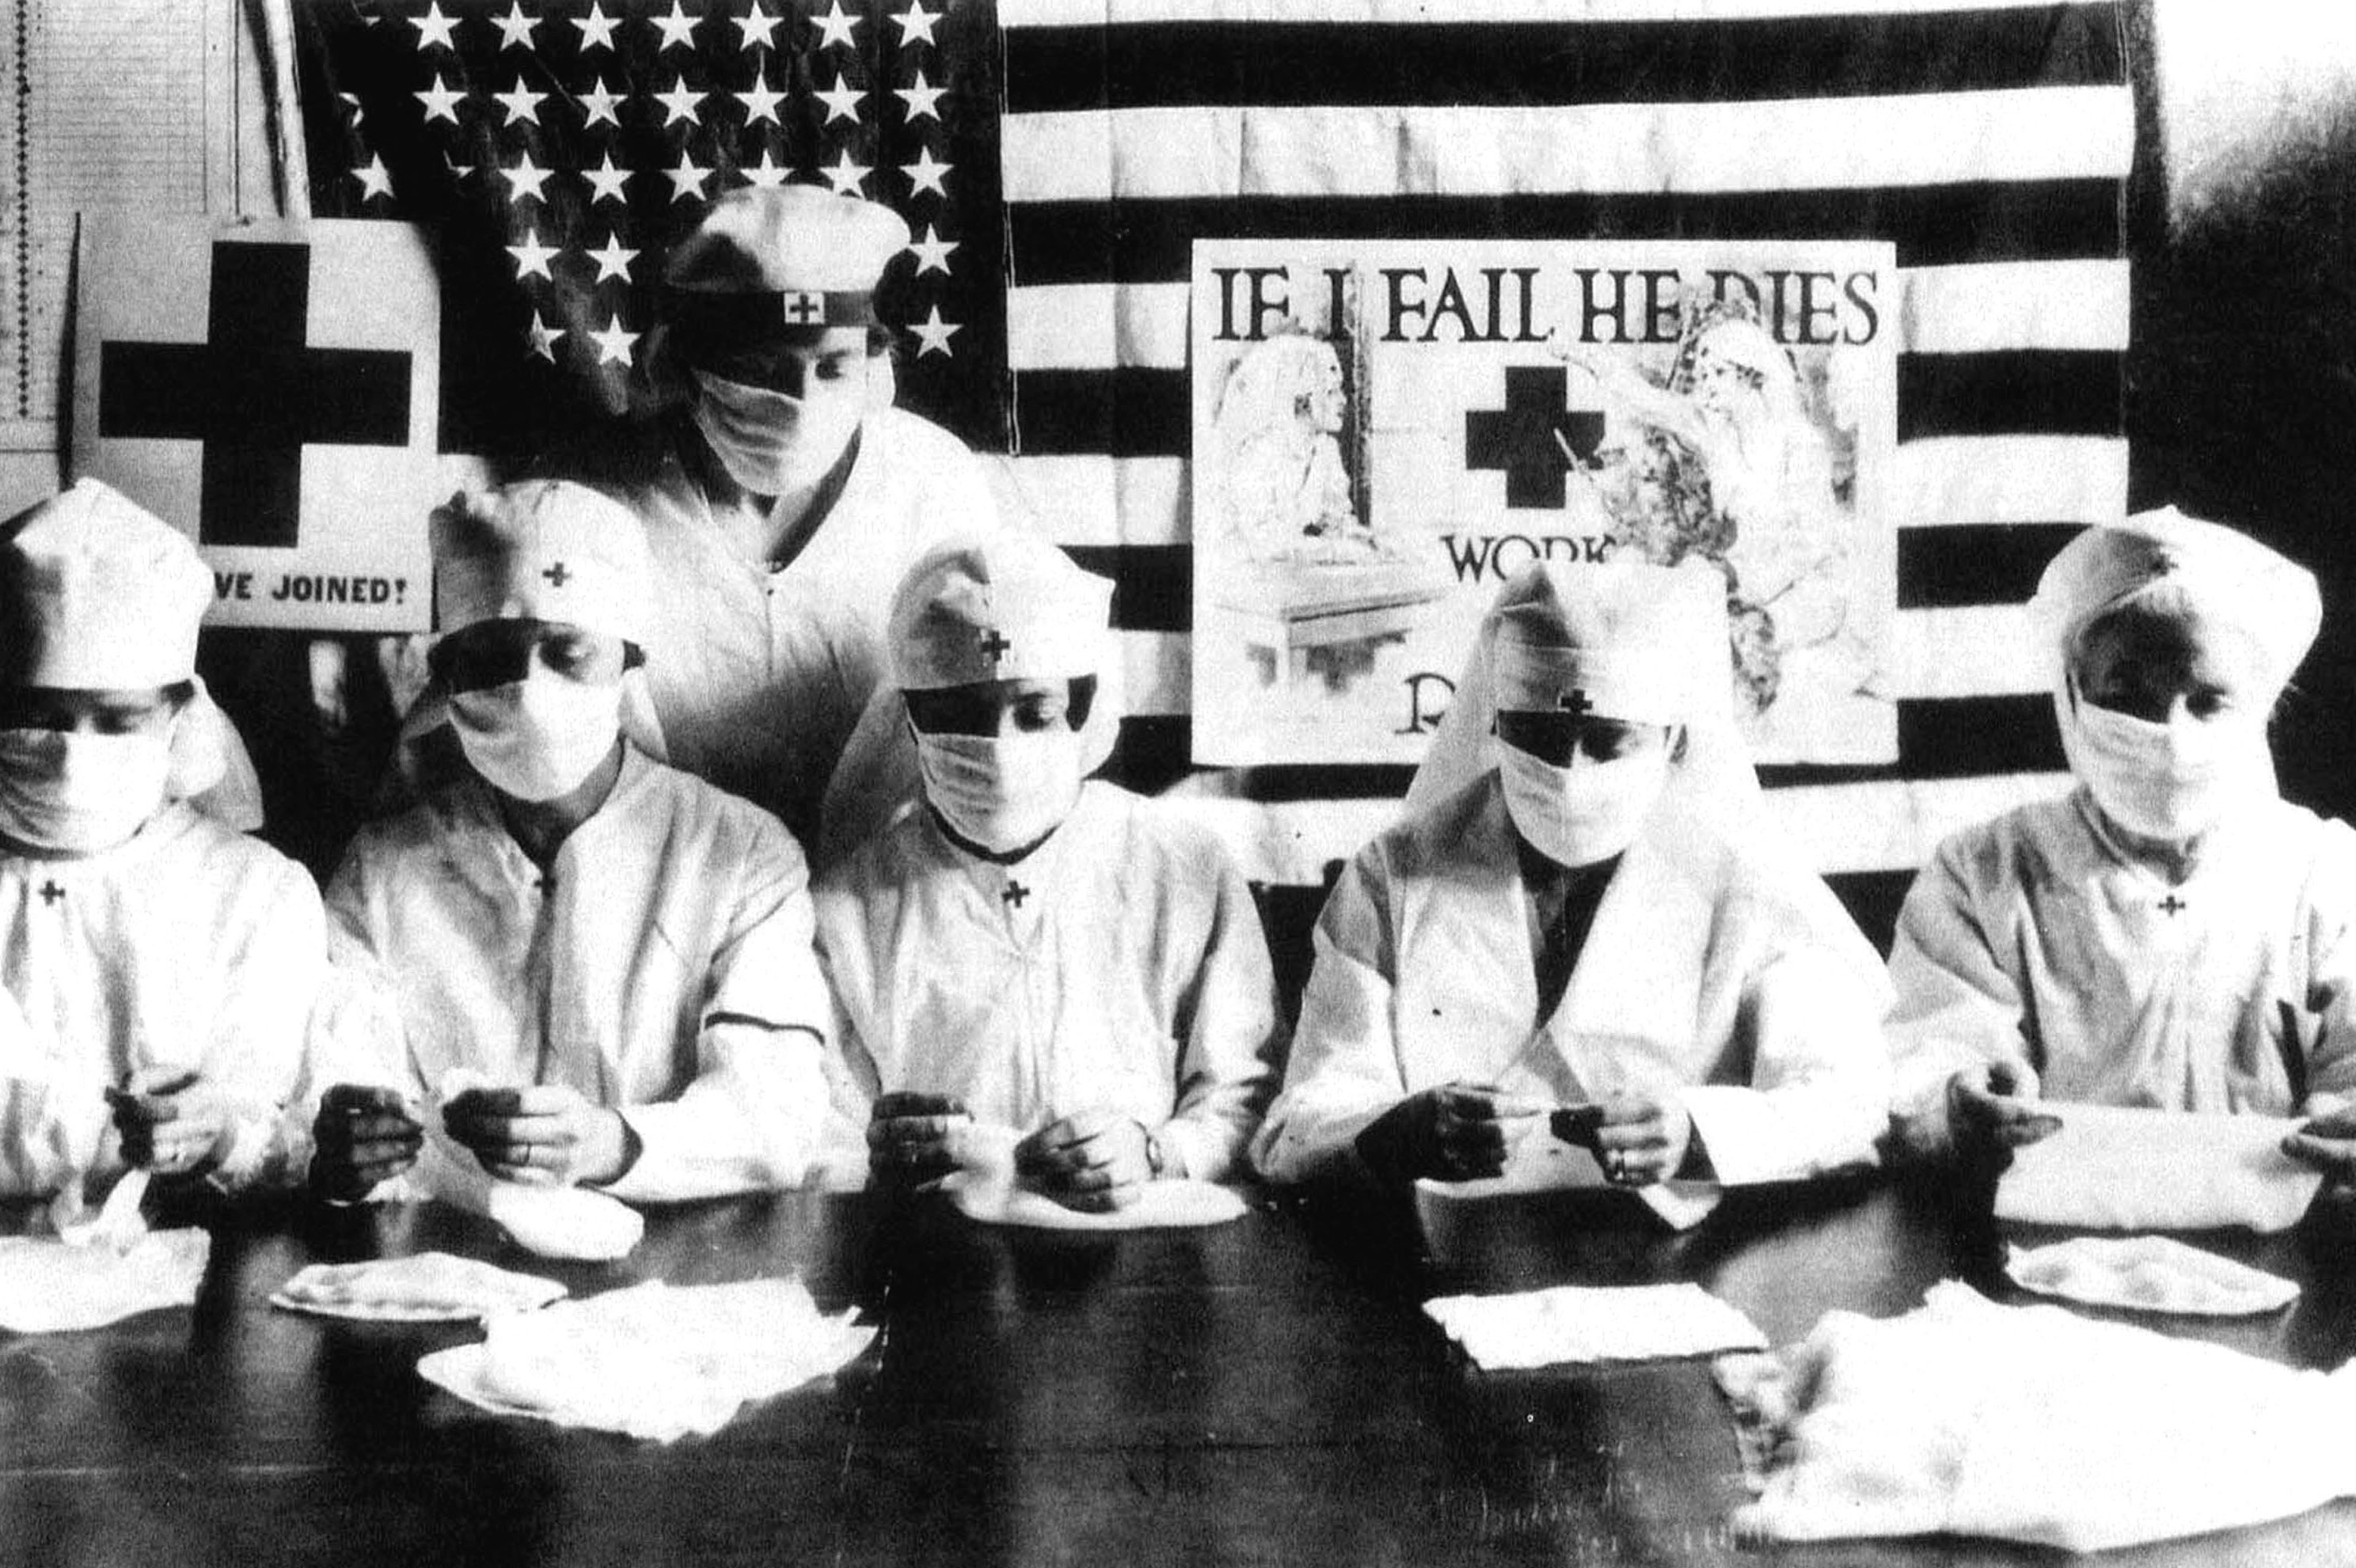 Red Cross volunteers fighting against the spanish flu epidemy in United States in 1918